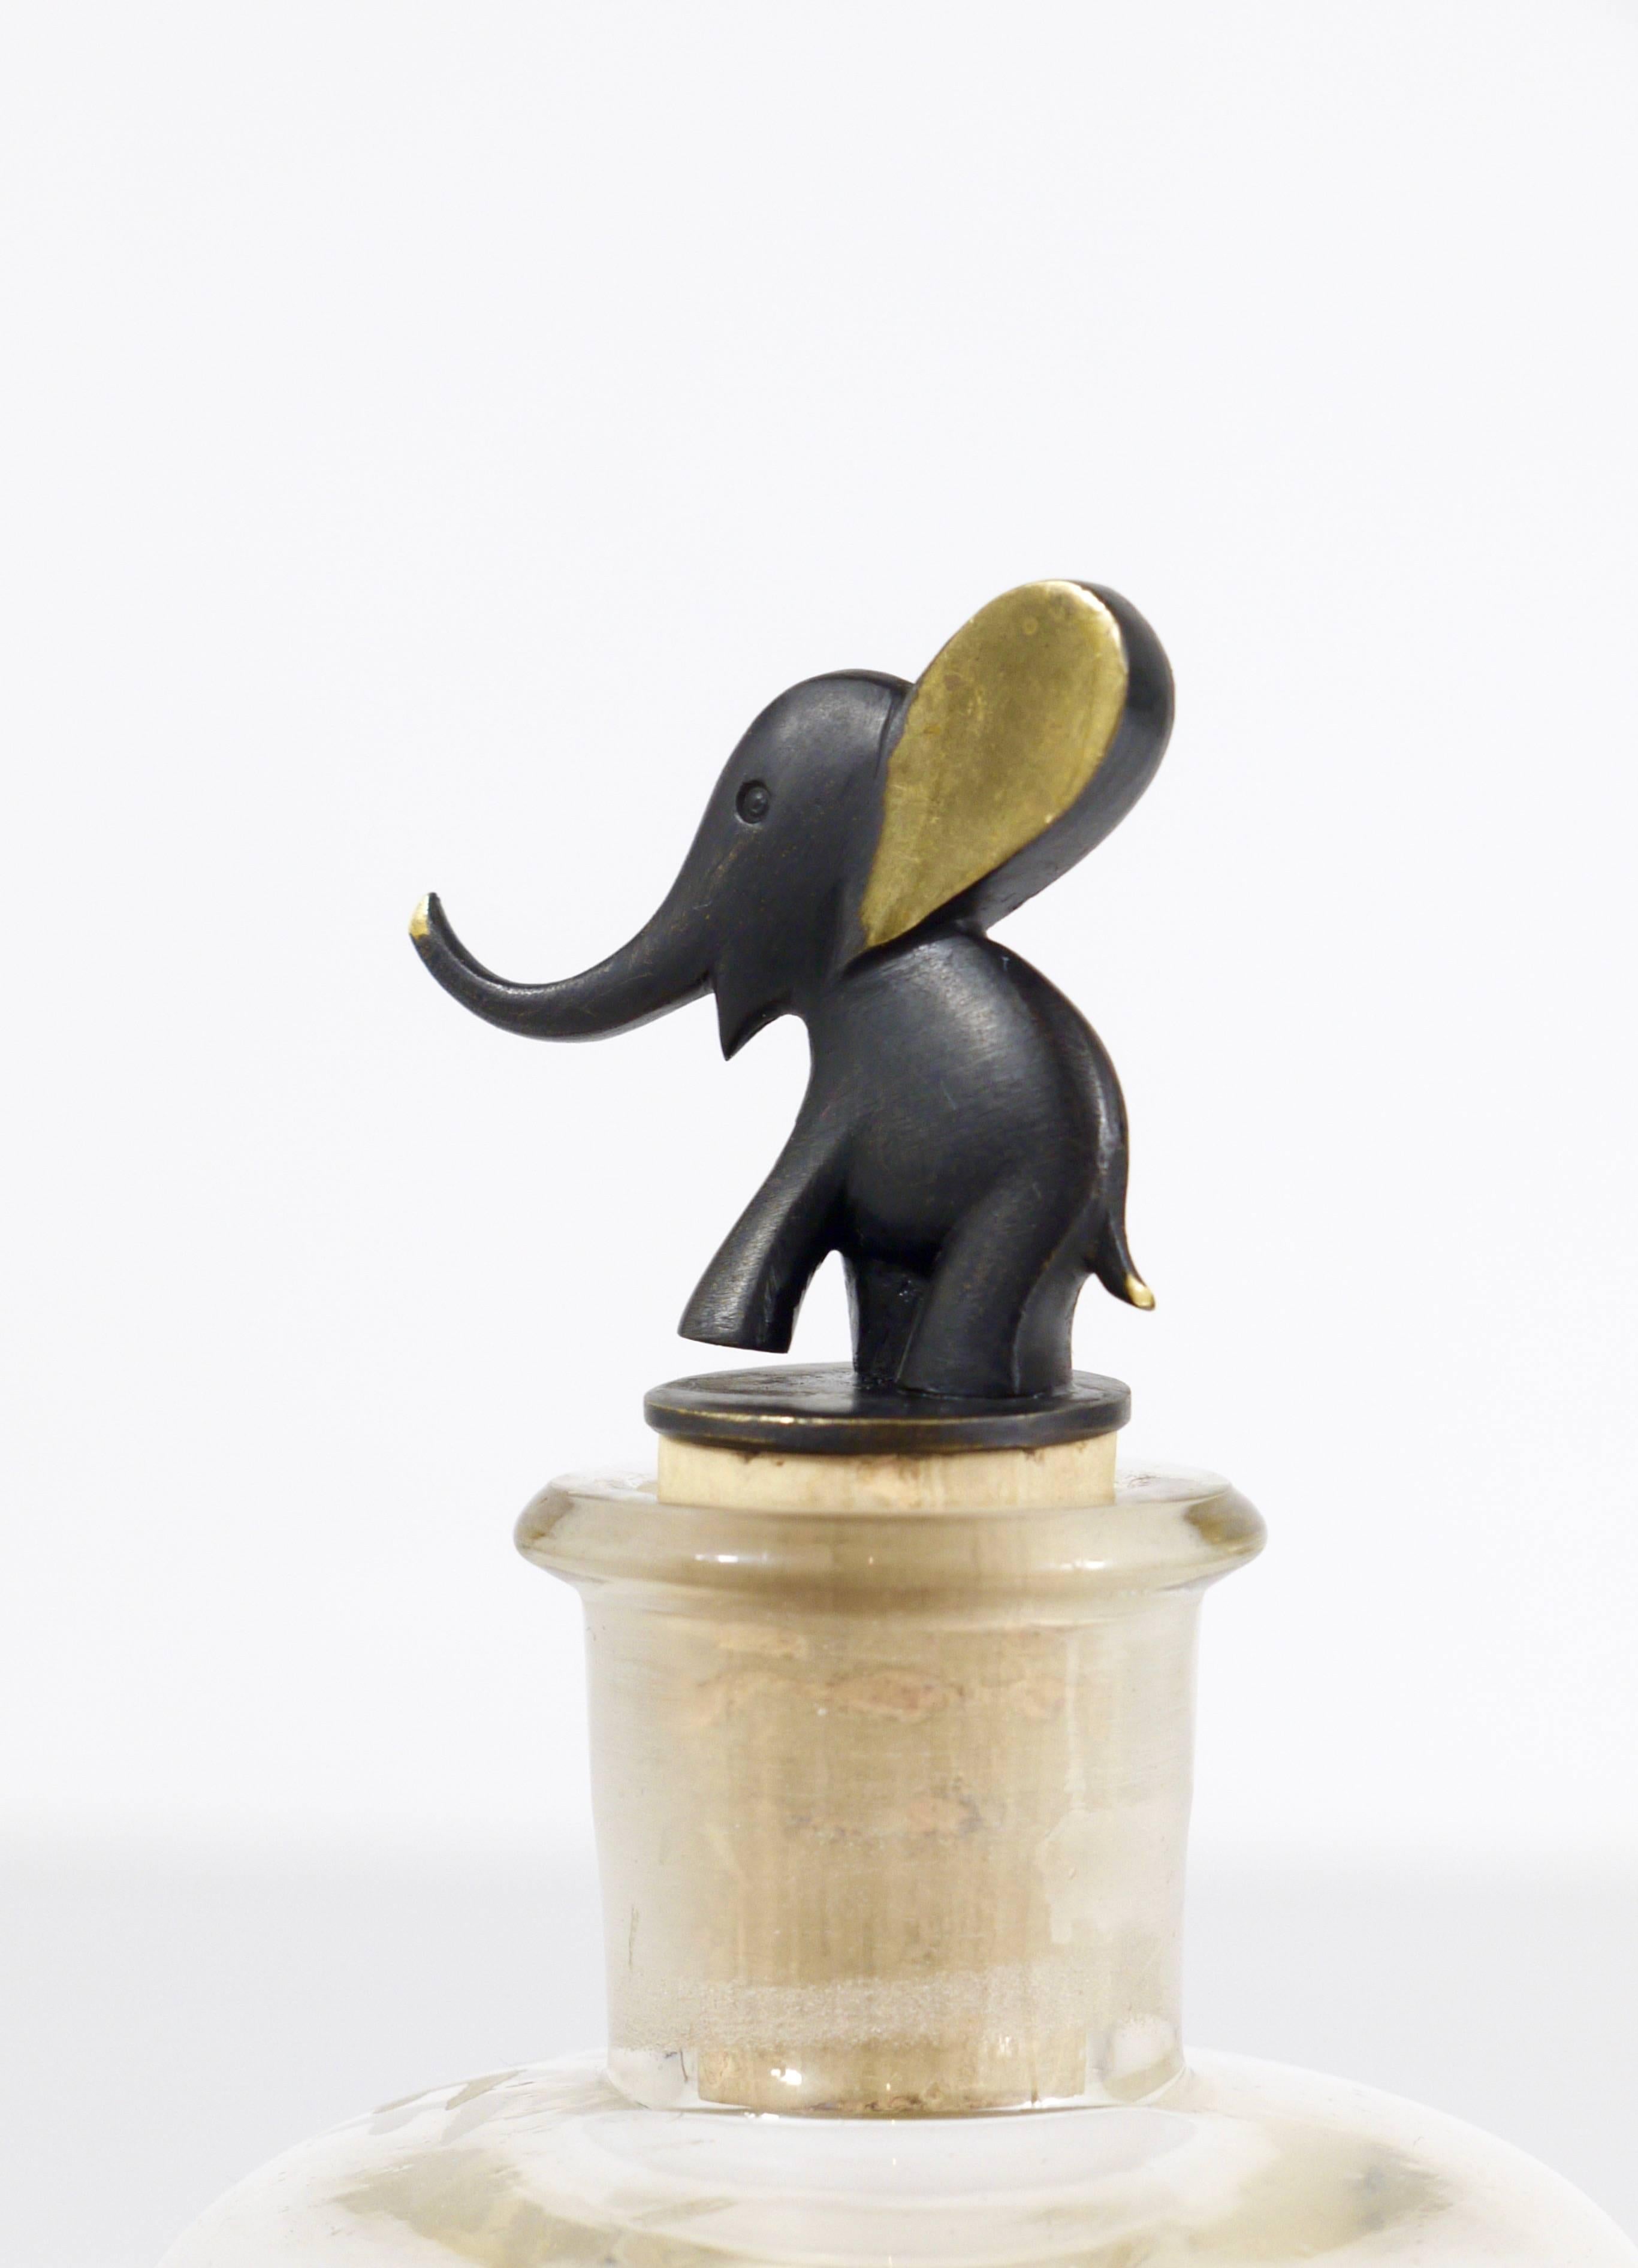 A charming Austrian bottle stopper, made of brass, displaying an elephant. A humorous design by Walter Bosse, manufactured in the 1950s by Hertha Baller, Vienna. In excellent condition.